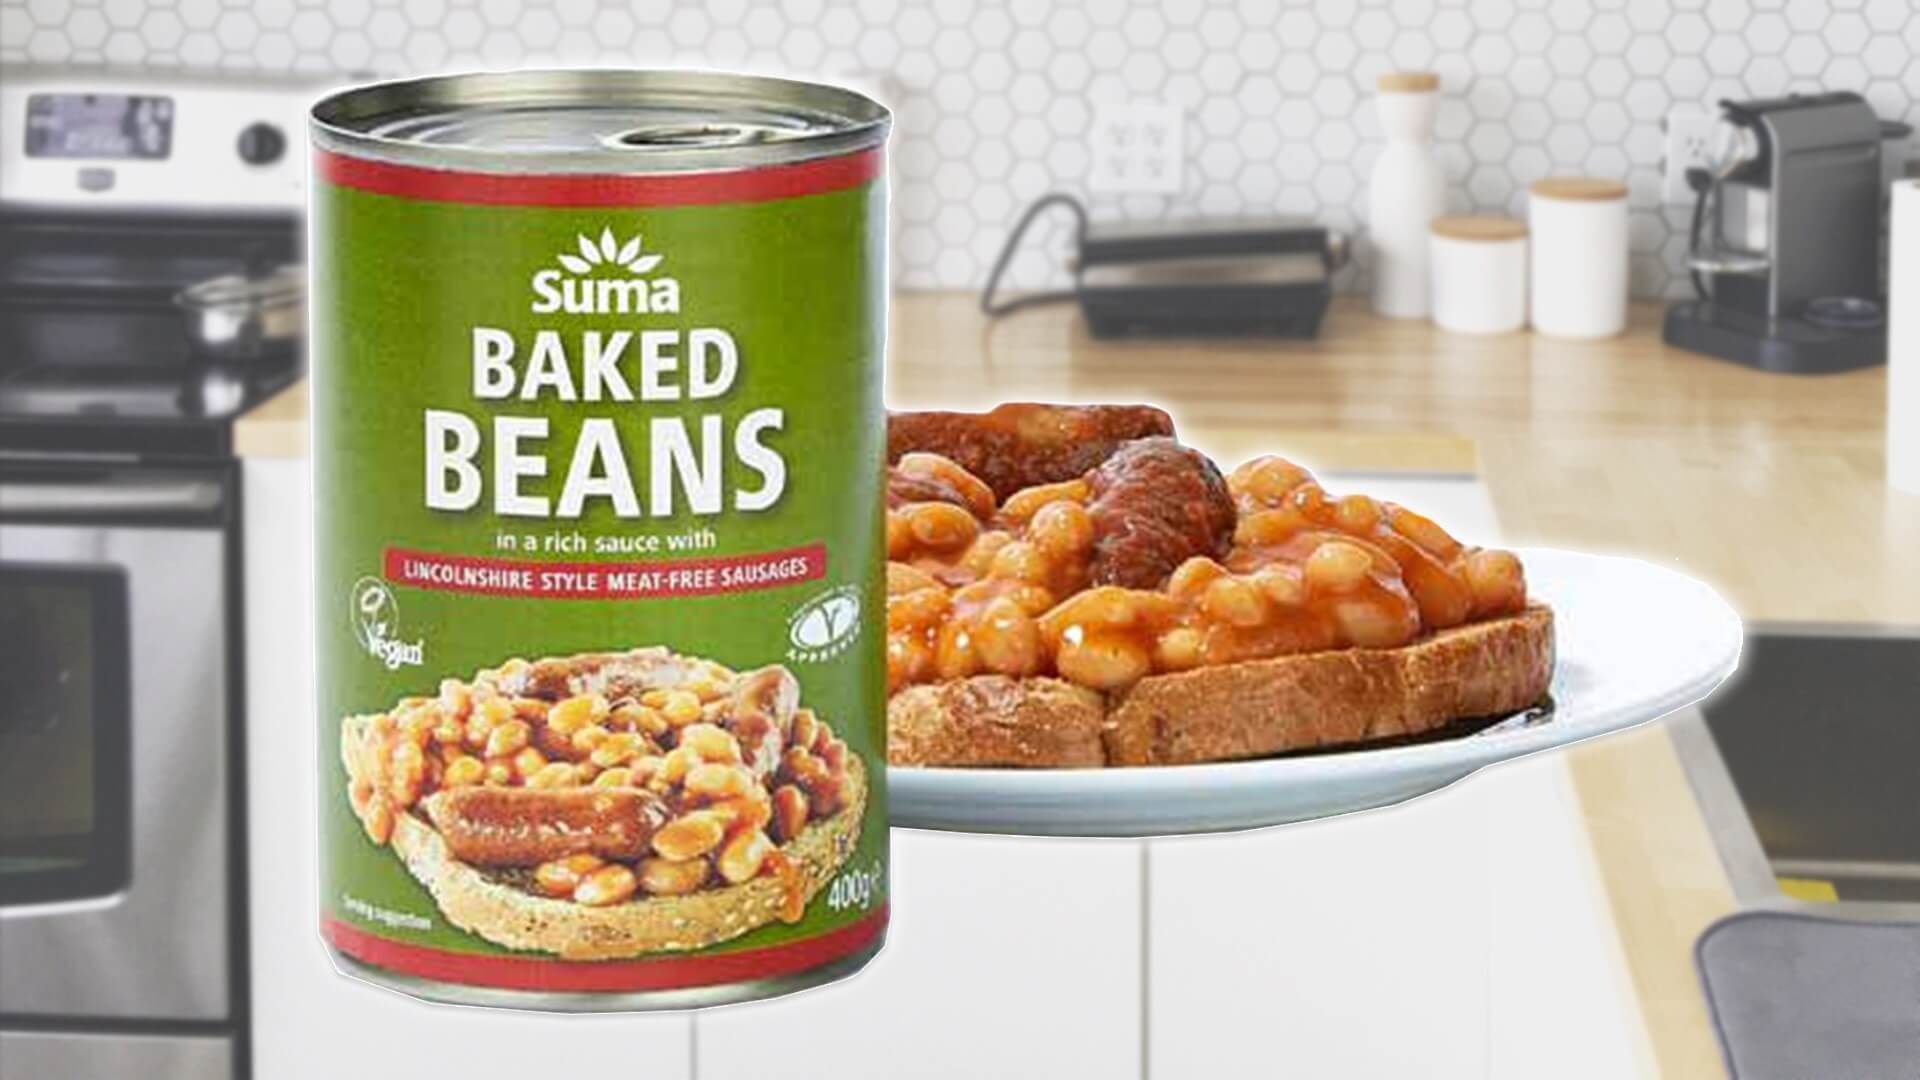 Canned Vegan Sausages And Beans Are Now at Co-Op Stores